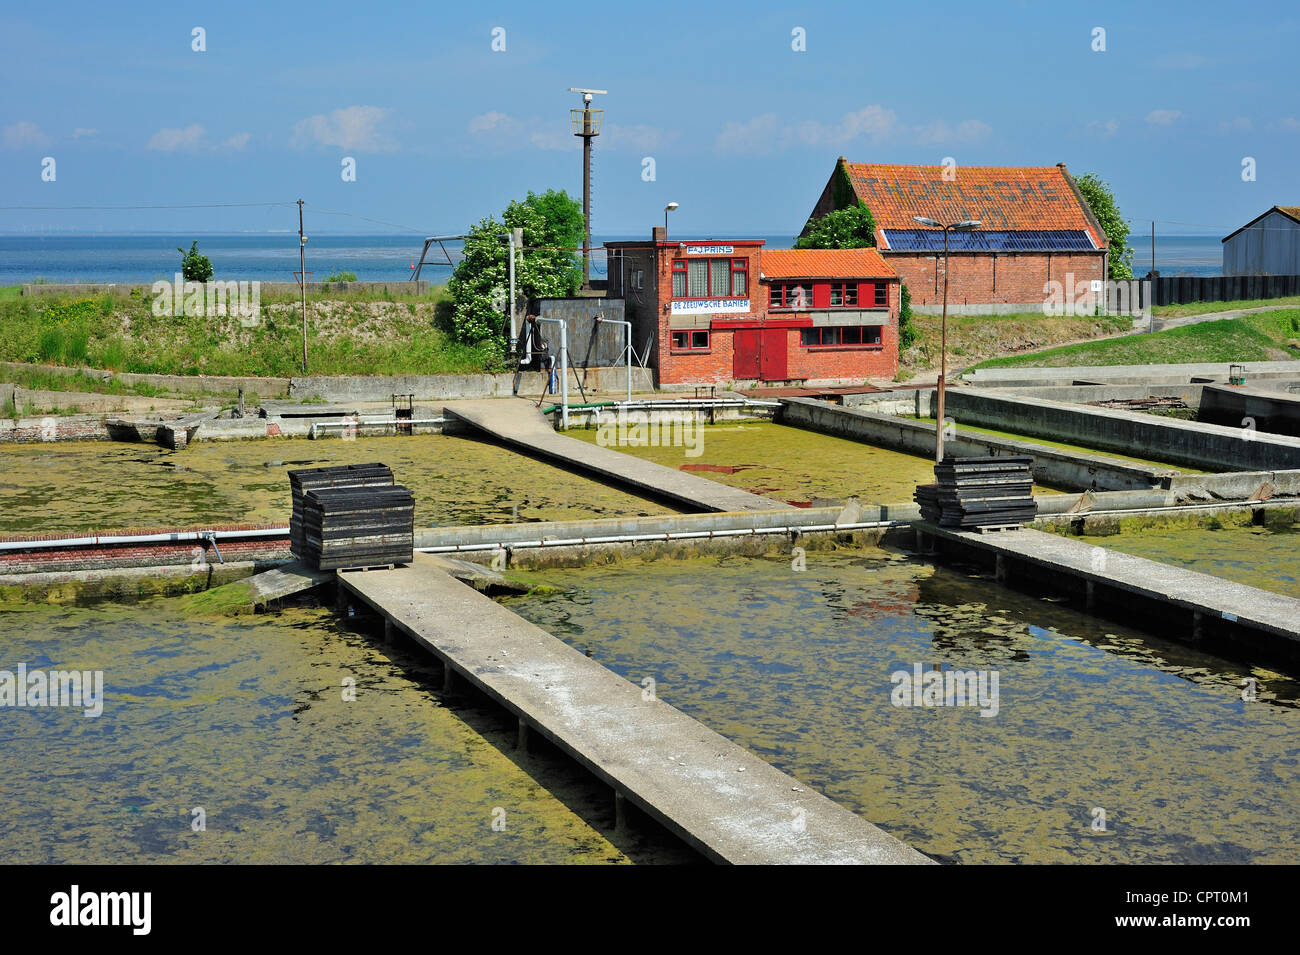 Oyster pits at Yerseke along the Oosterschelde / Eastern Scheldt, known for its aquaculture in Zealand, the Netherlands Stock Photo